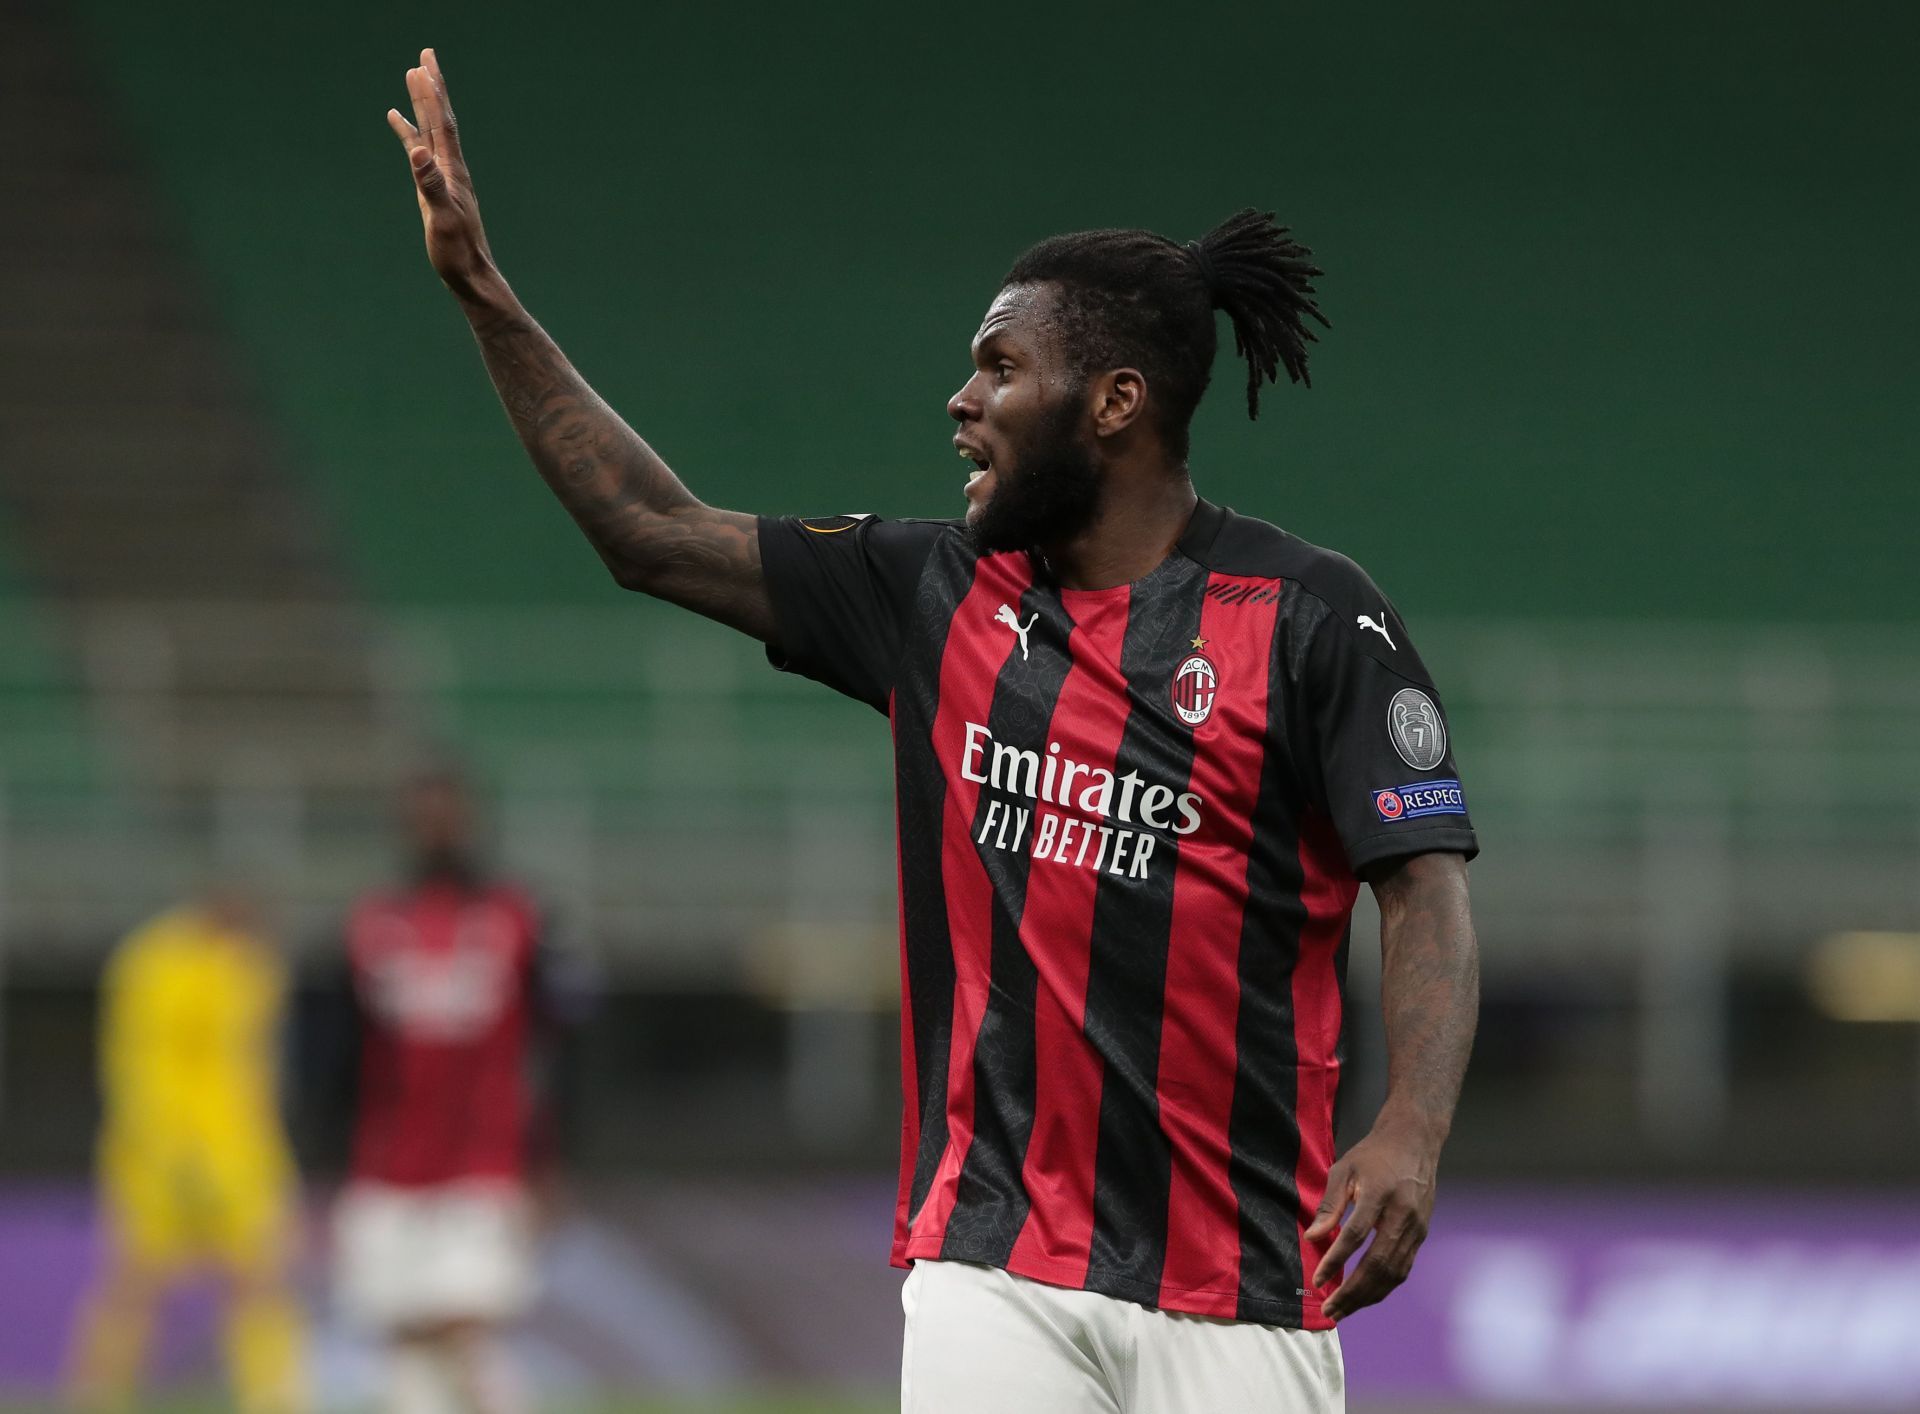 Kessie could be a good alternative for Barca.